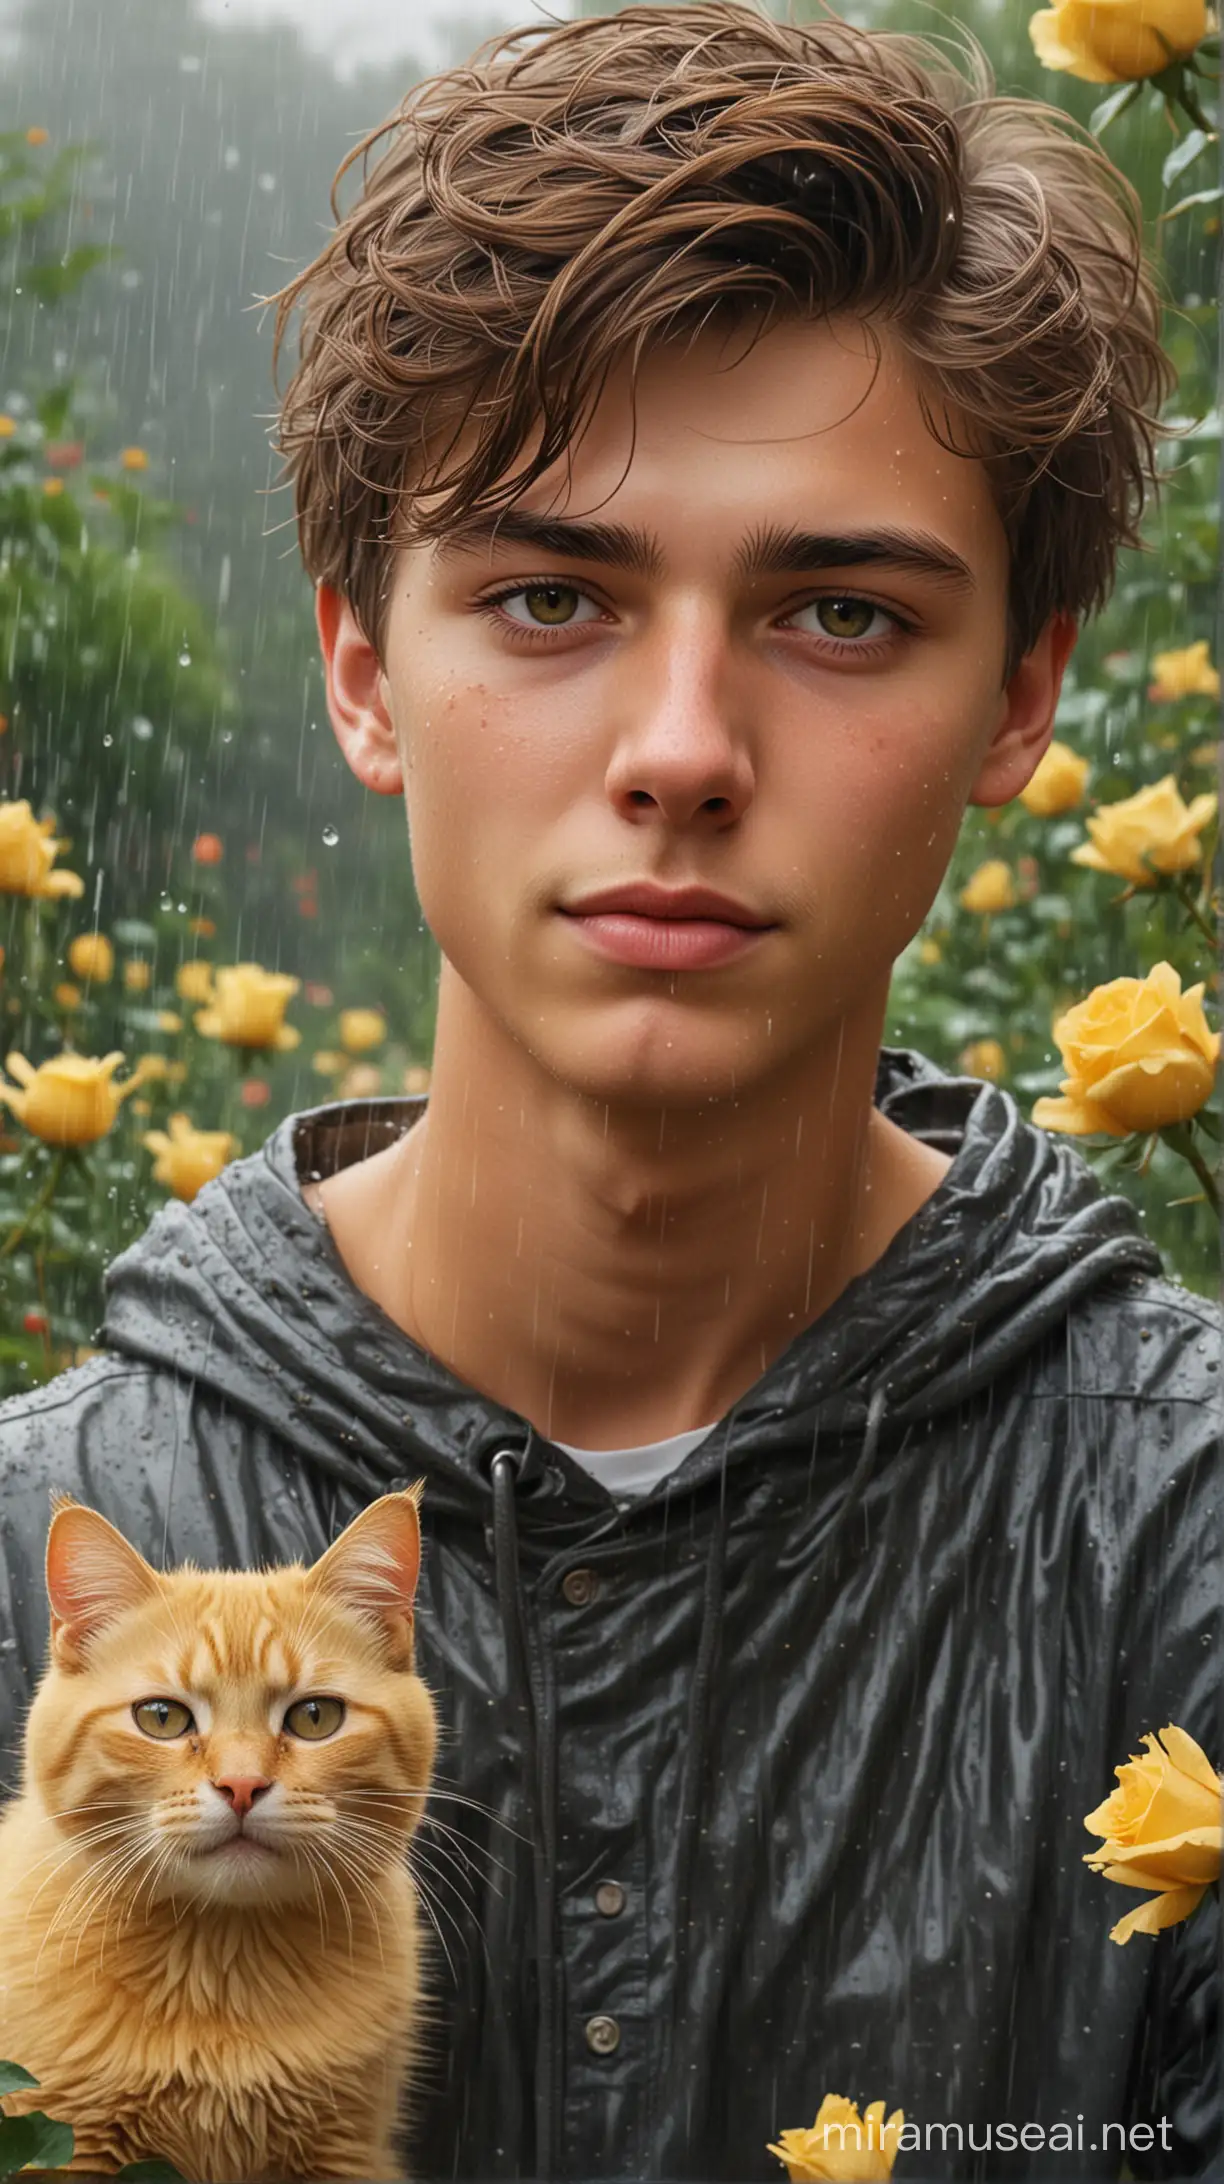 Elegant Young Man with Windblown Hair Holding Yellow Cat in RainSoaked Rose Garden